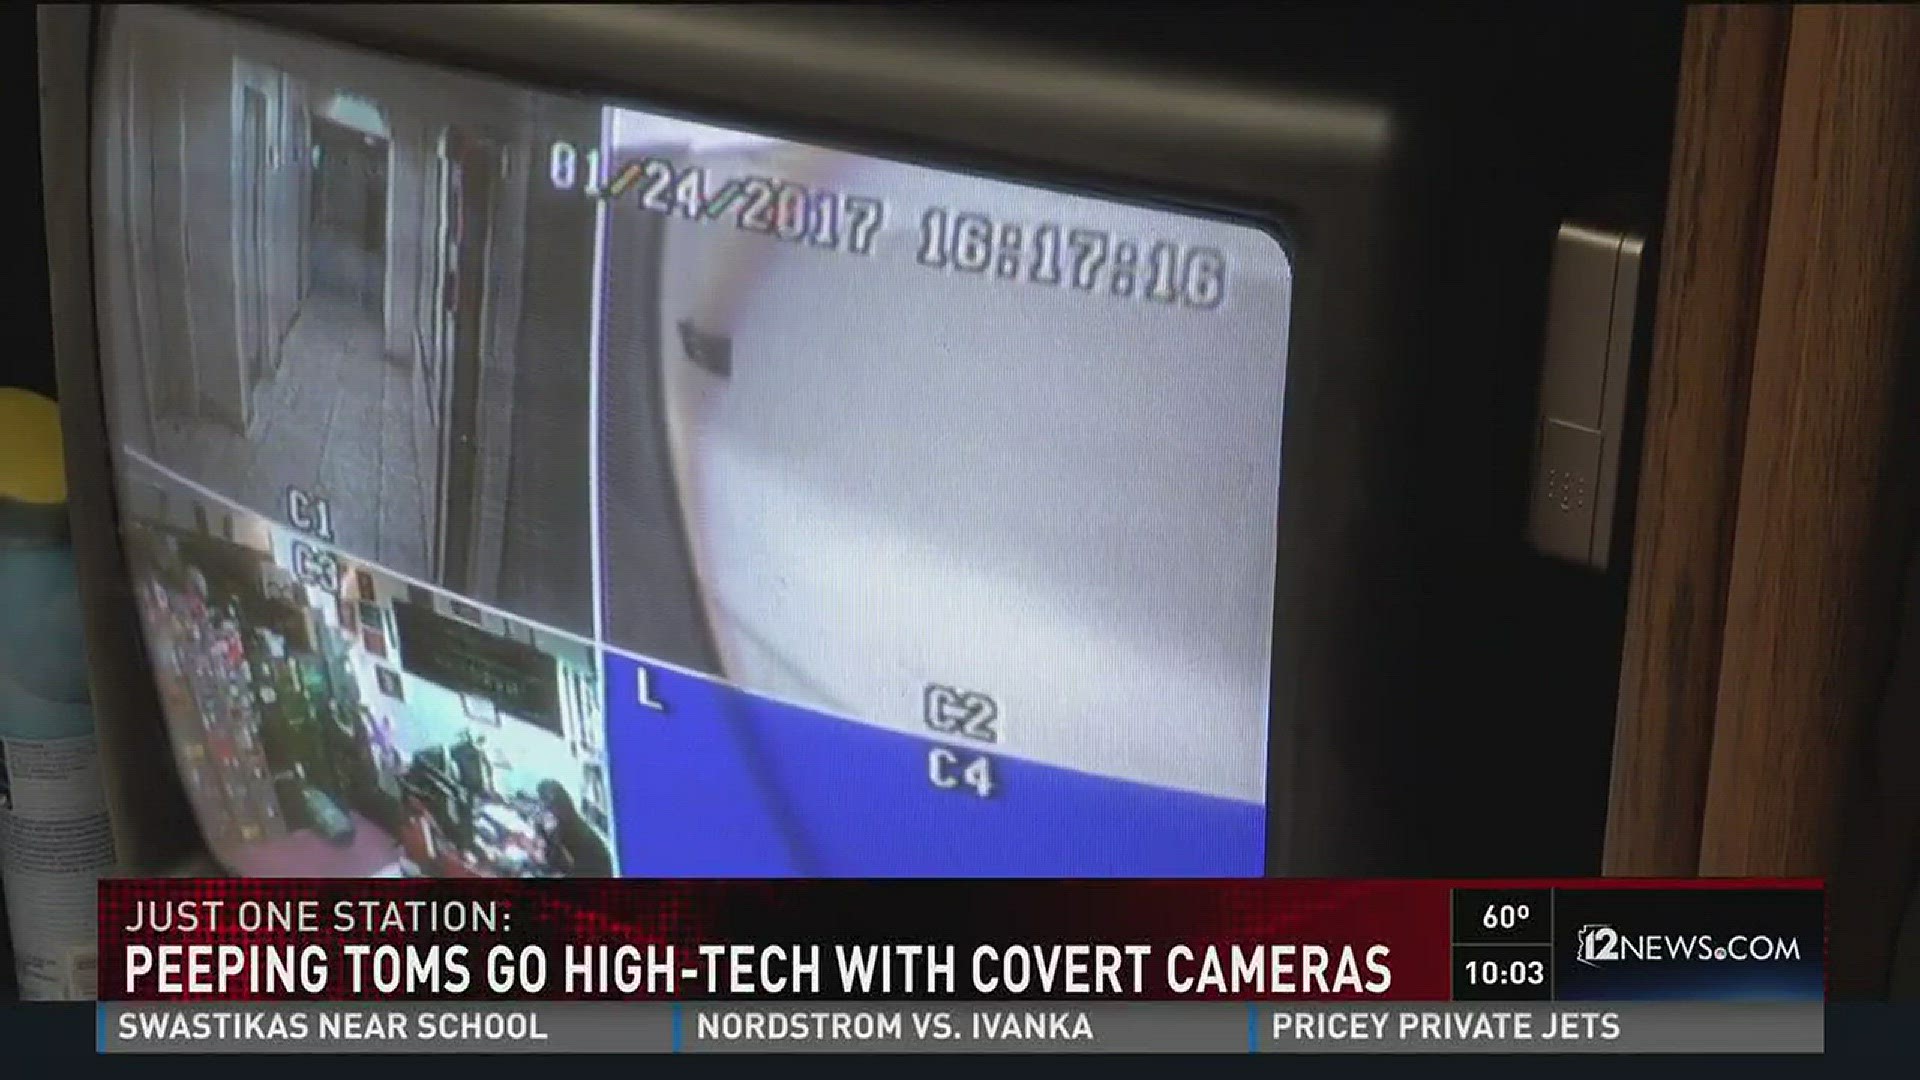 You would never know it was there Peeping Toms go high-tech with covert cameras 12news image